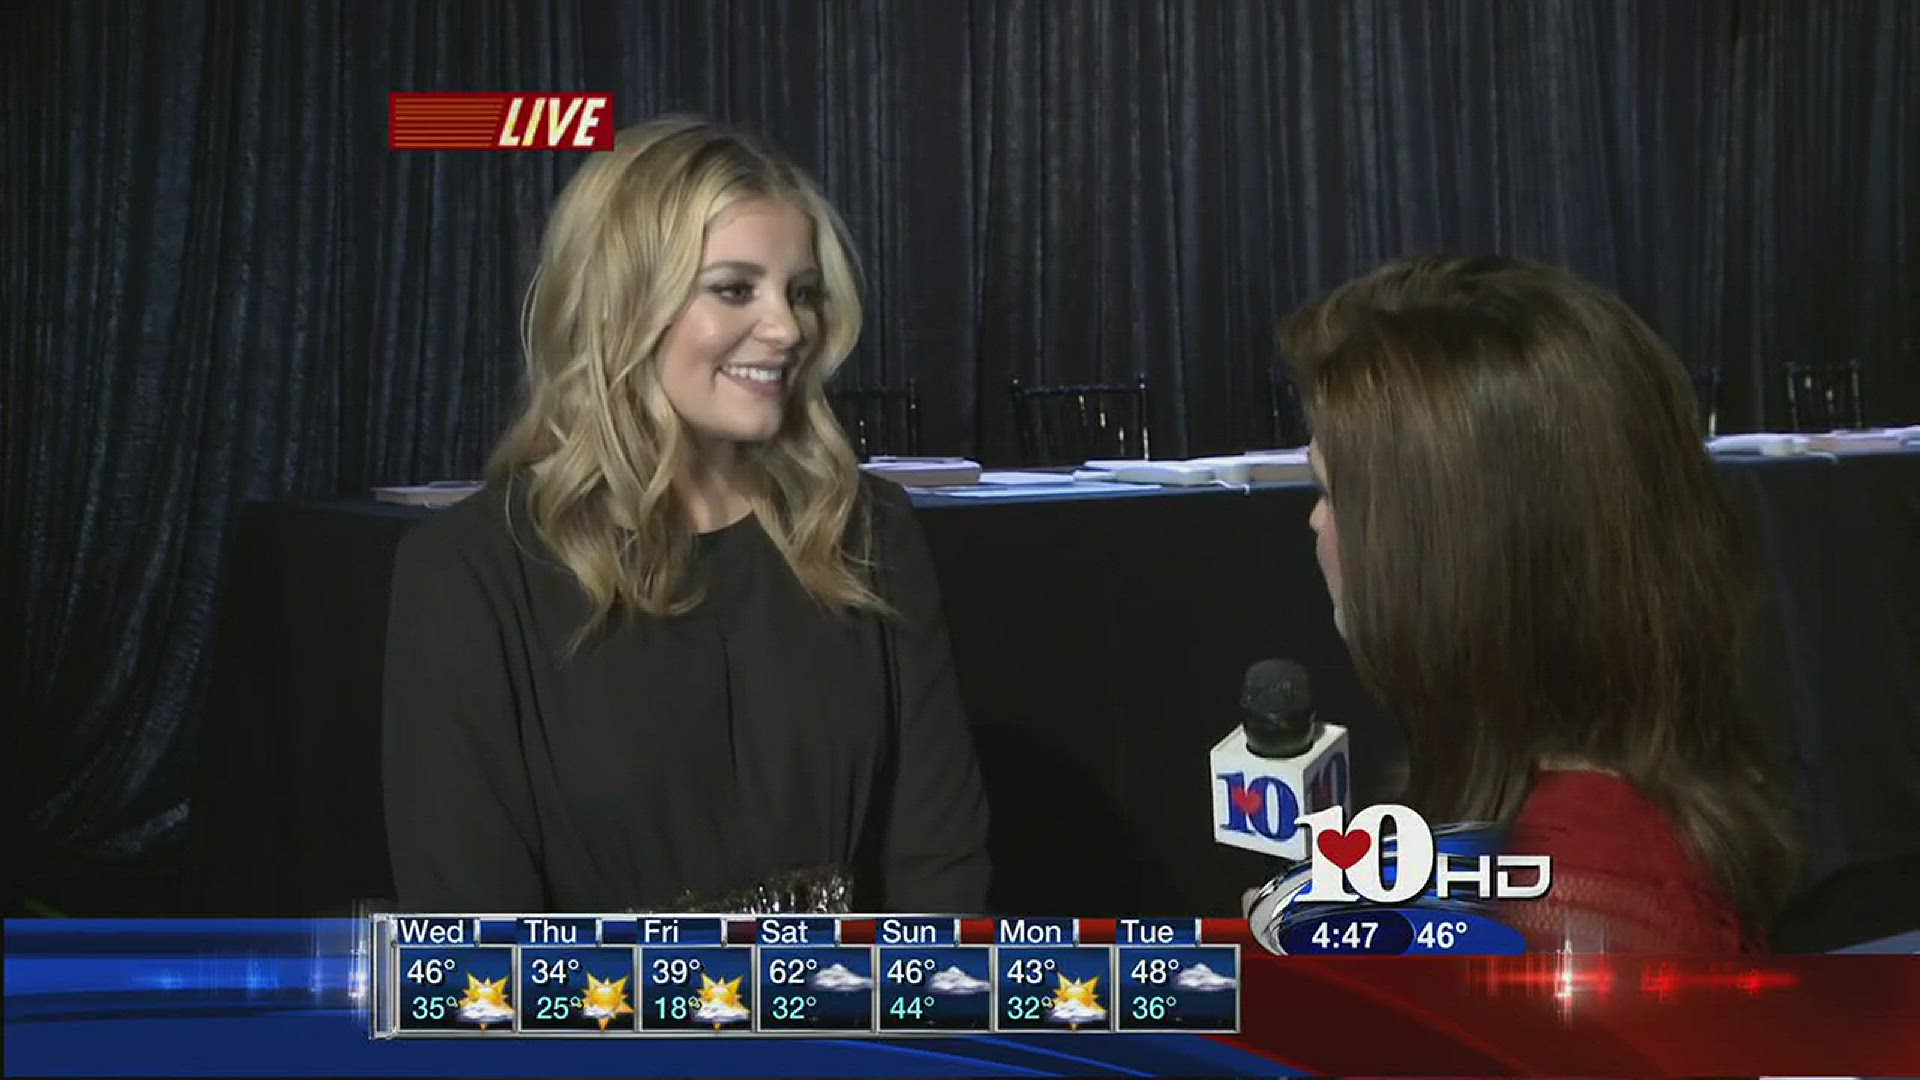 December 13, 2016Live at Five at 4Country singer Lauren Alaina grew up in Georgia, near Chattanooga. She is joining Dolly Parton's Smoky Mountains Rise telethon for her My People Fund.